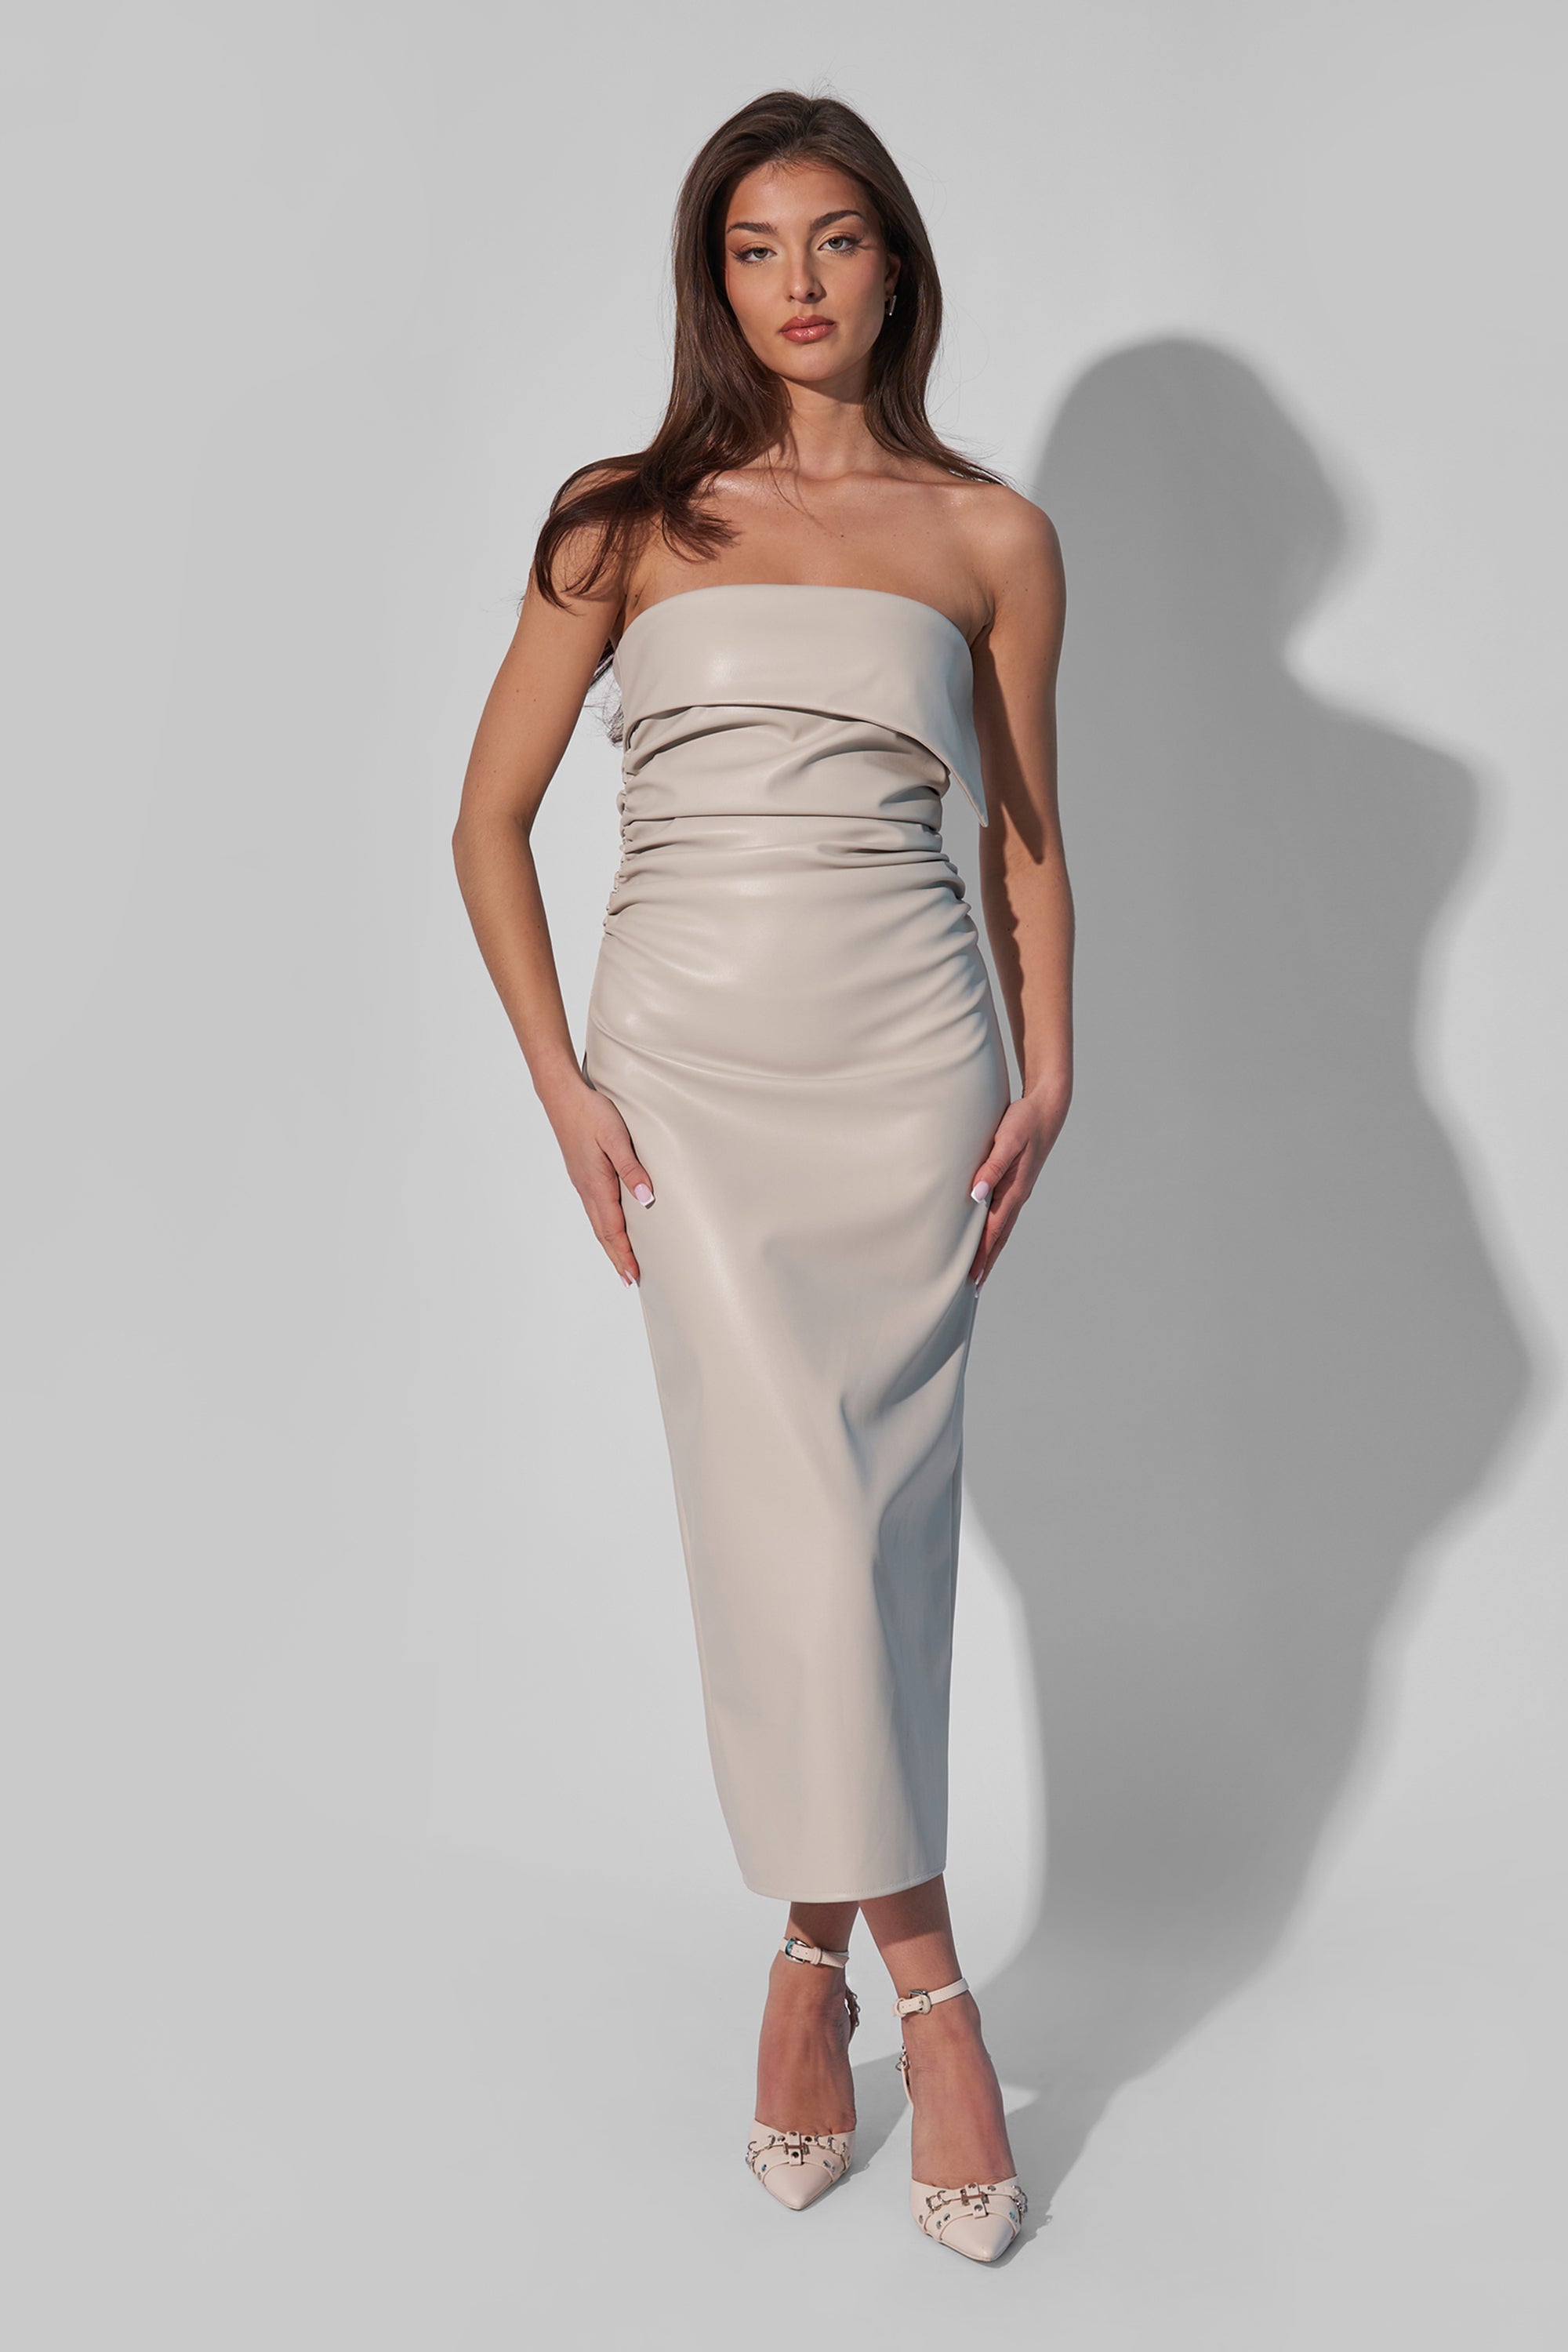 Image of Kaiia Leather Look Ruched Bandeau Midaxi Dress In Ecru UK 8